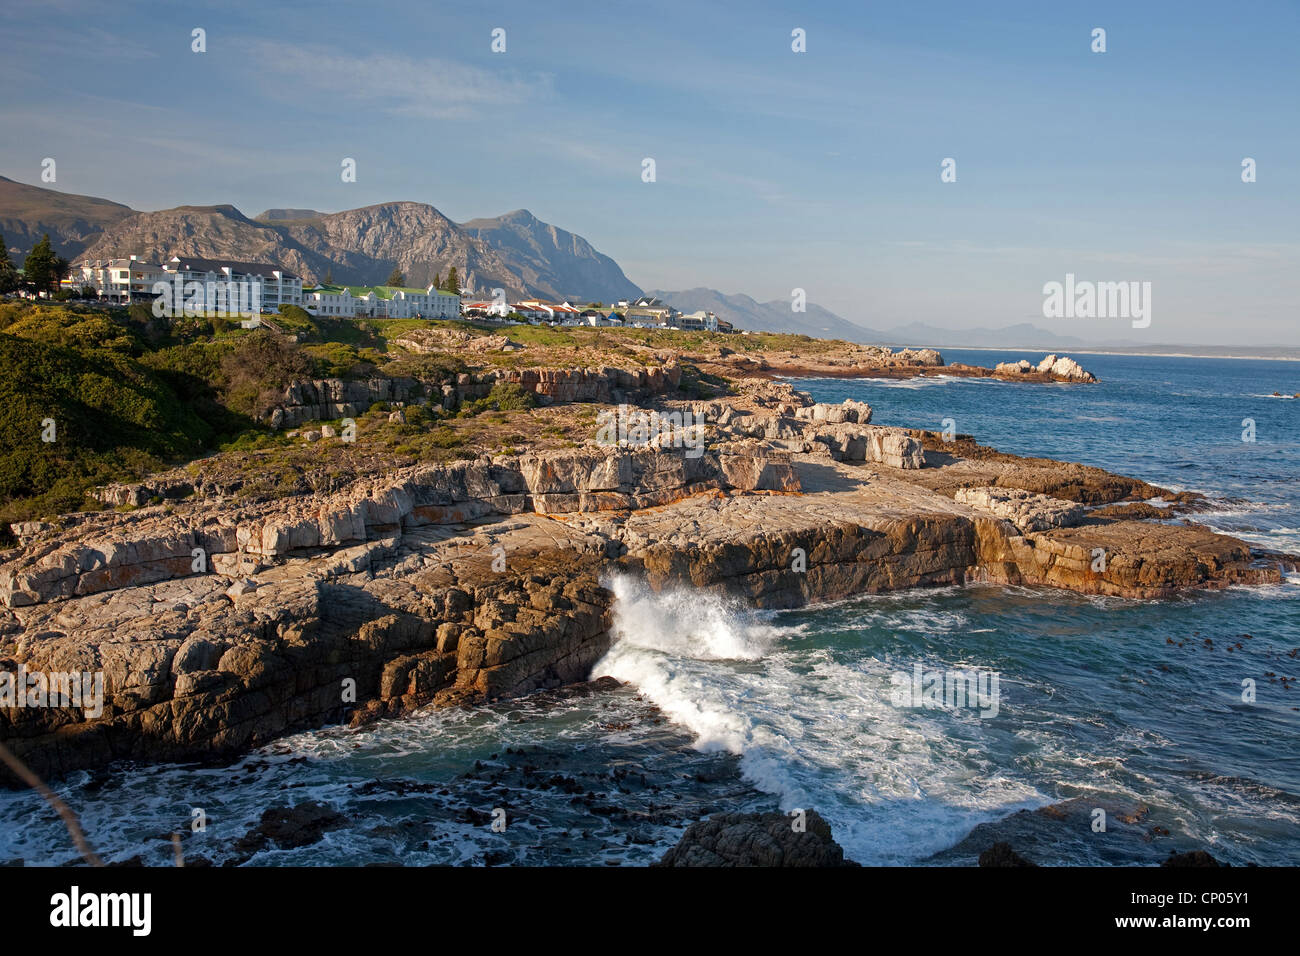 rocky coast and seaside town, South Africa, Hermanus Stock Photo